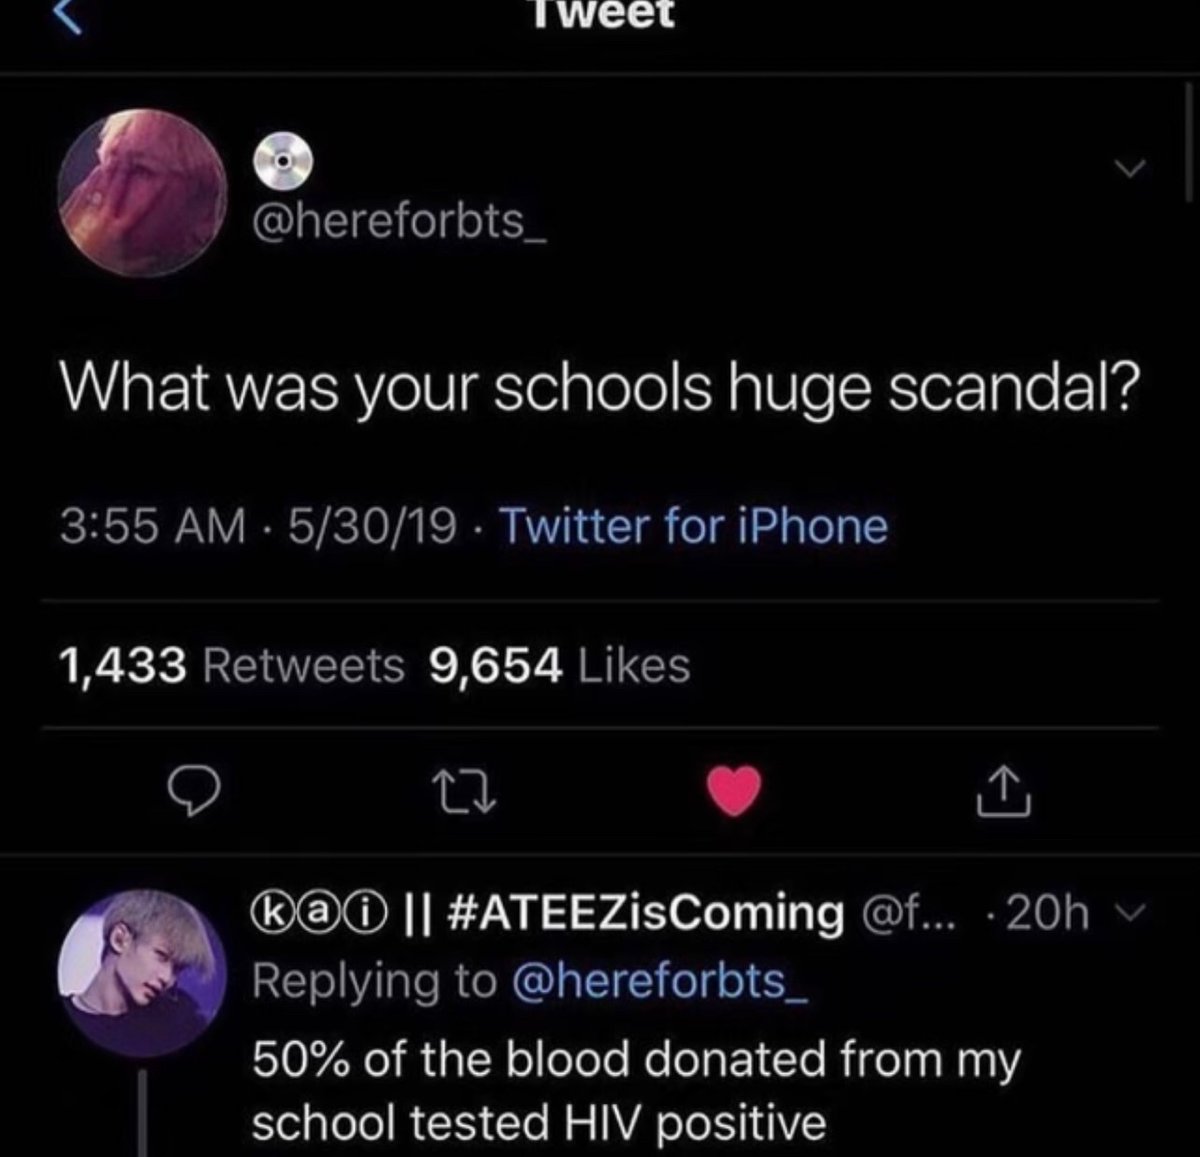 the internet hall of shame - your schools biggest scandal - What was your schools huge scandal? 53019 Twitter for iPhone 1,433 9,654 27 k@ || ... .20h 50% of the blood donated from my school tested Hiv positive